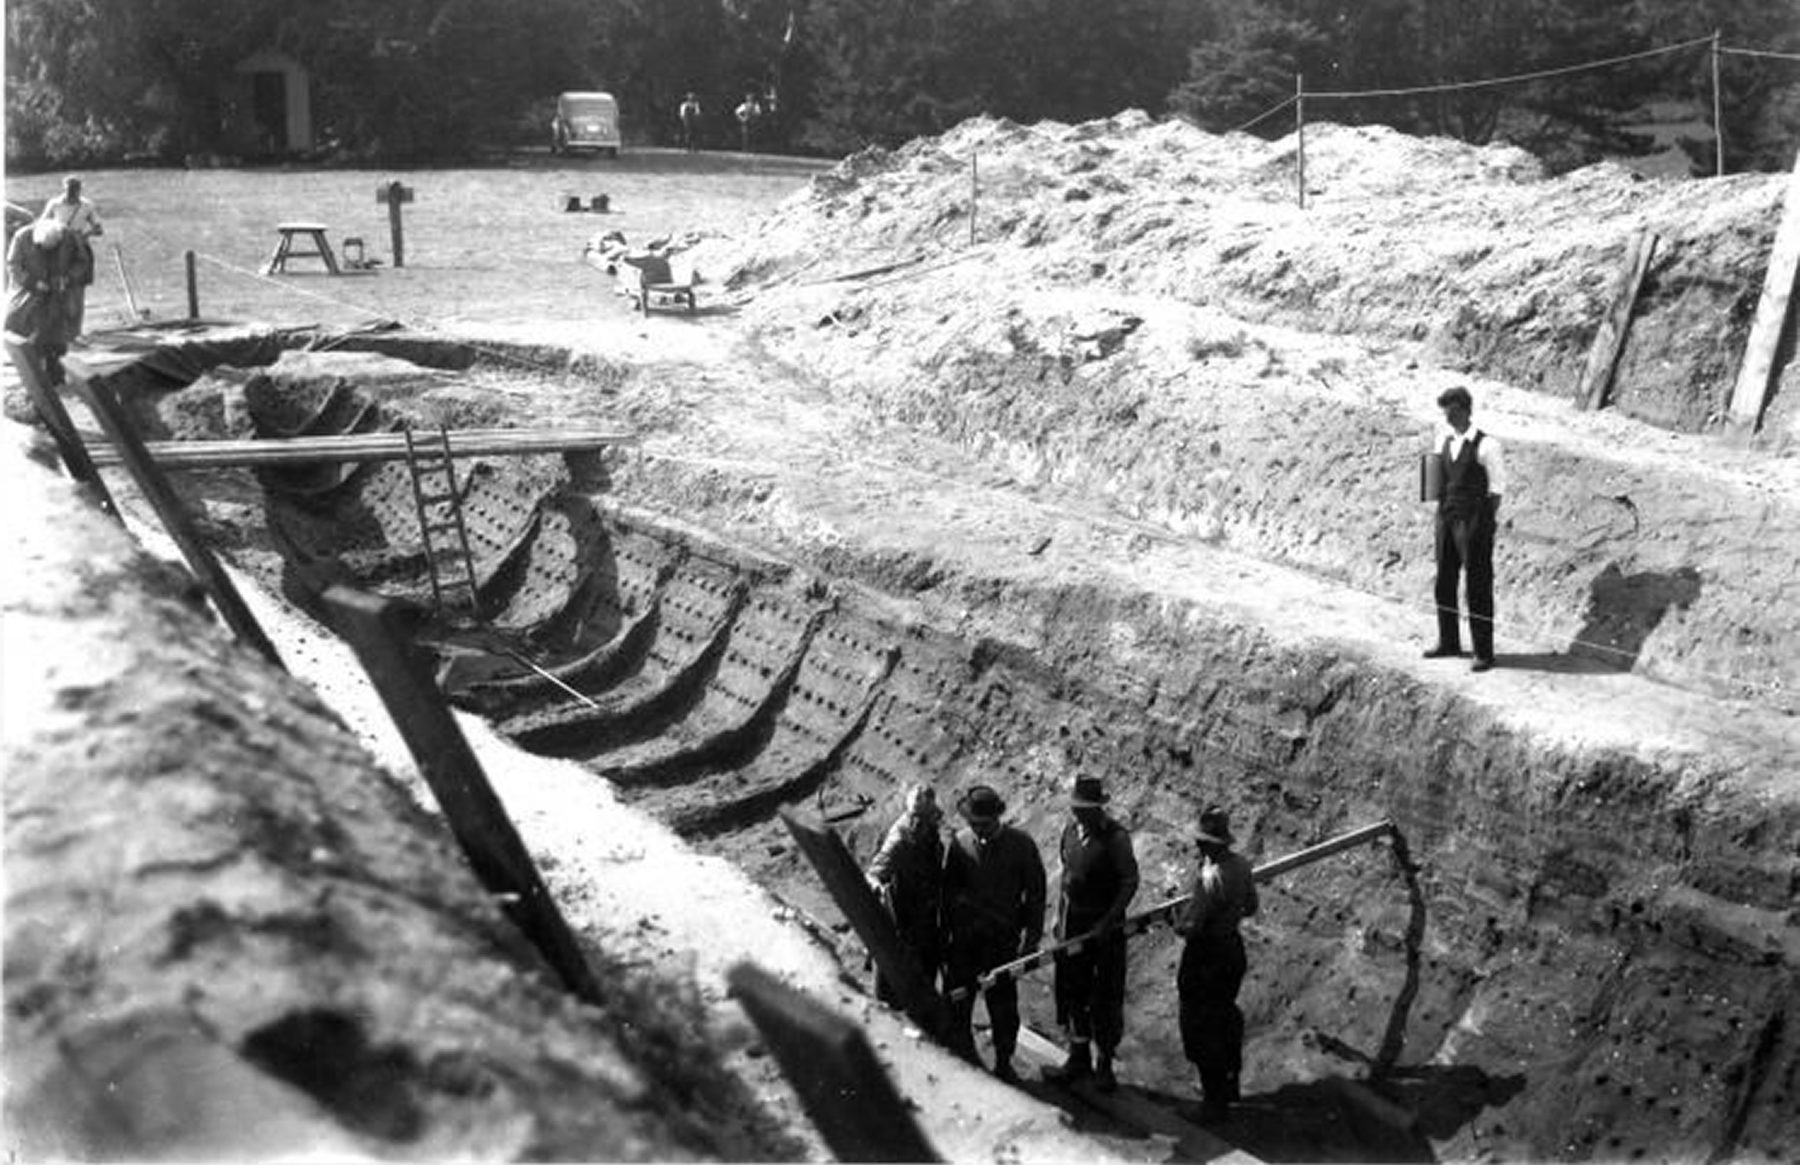 Photo of the excavation of the Sutton Hoo ship burial, by Barbara Wagstaff, 1939. © 2019 The Trustees of the British Museum